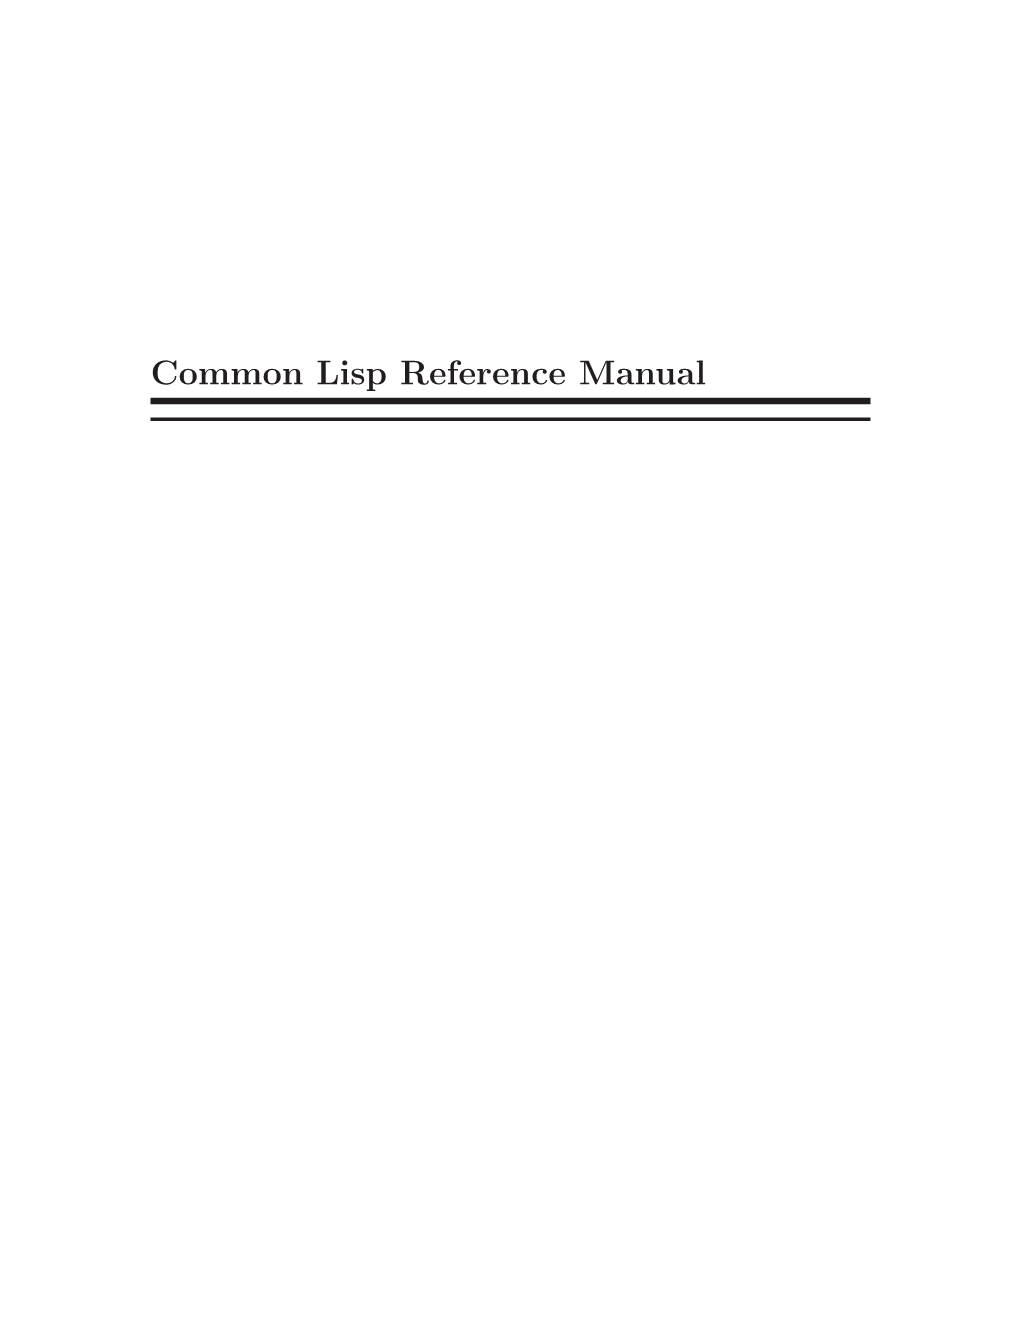 Common Lisp Reference Manual the Common Lisp Reference Manual Copyright C 2006 Robert Strandh